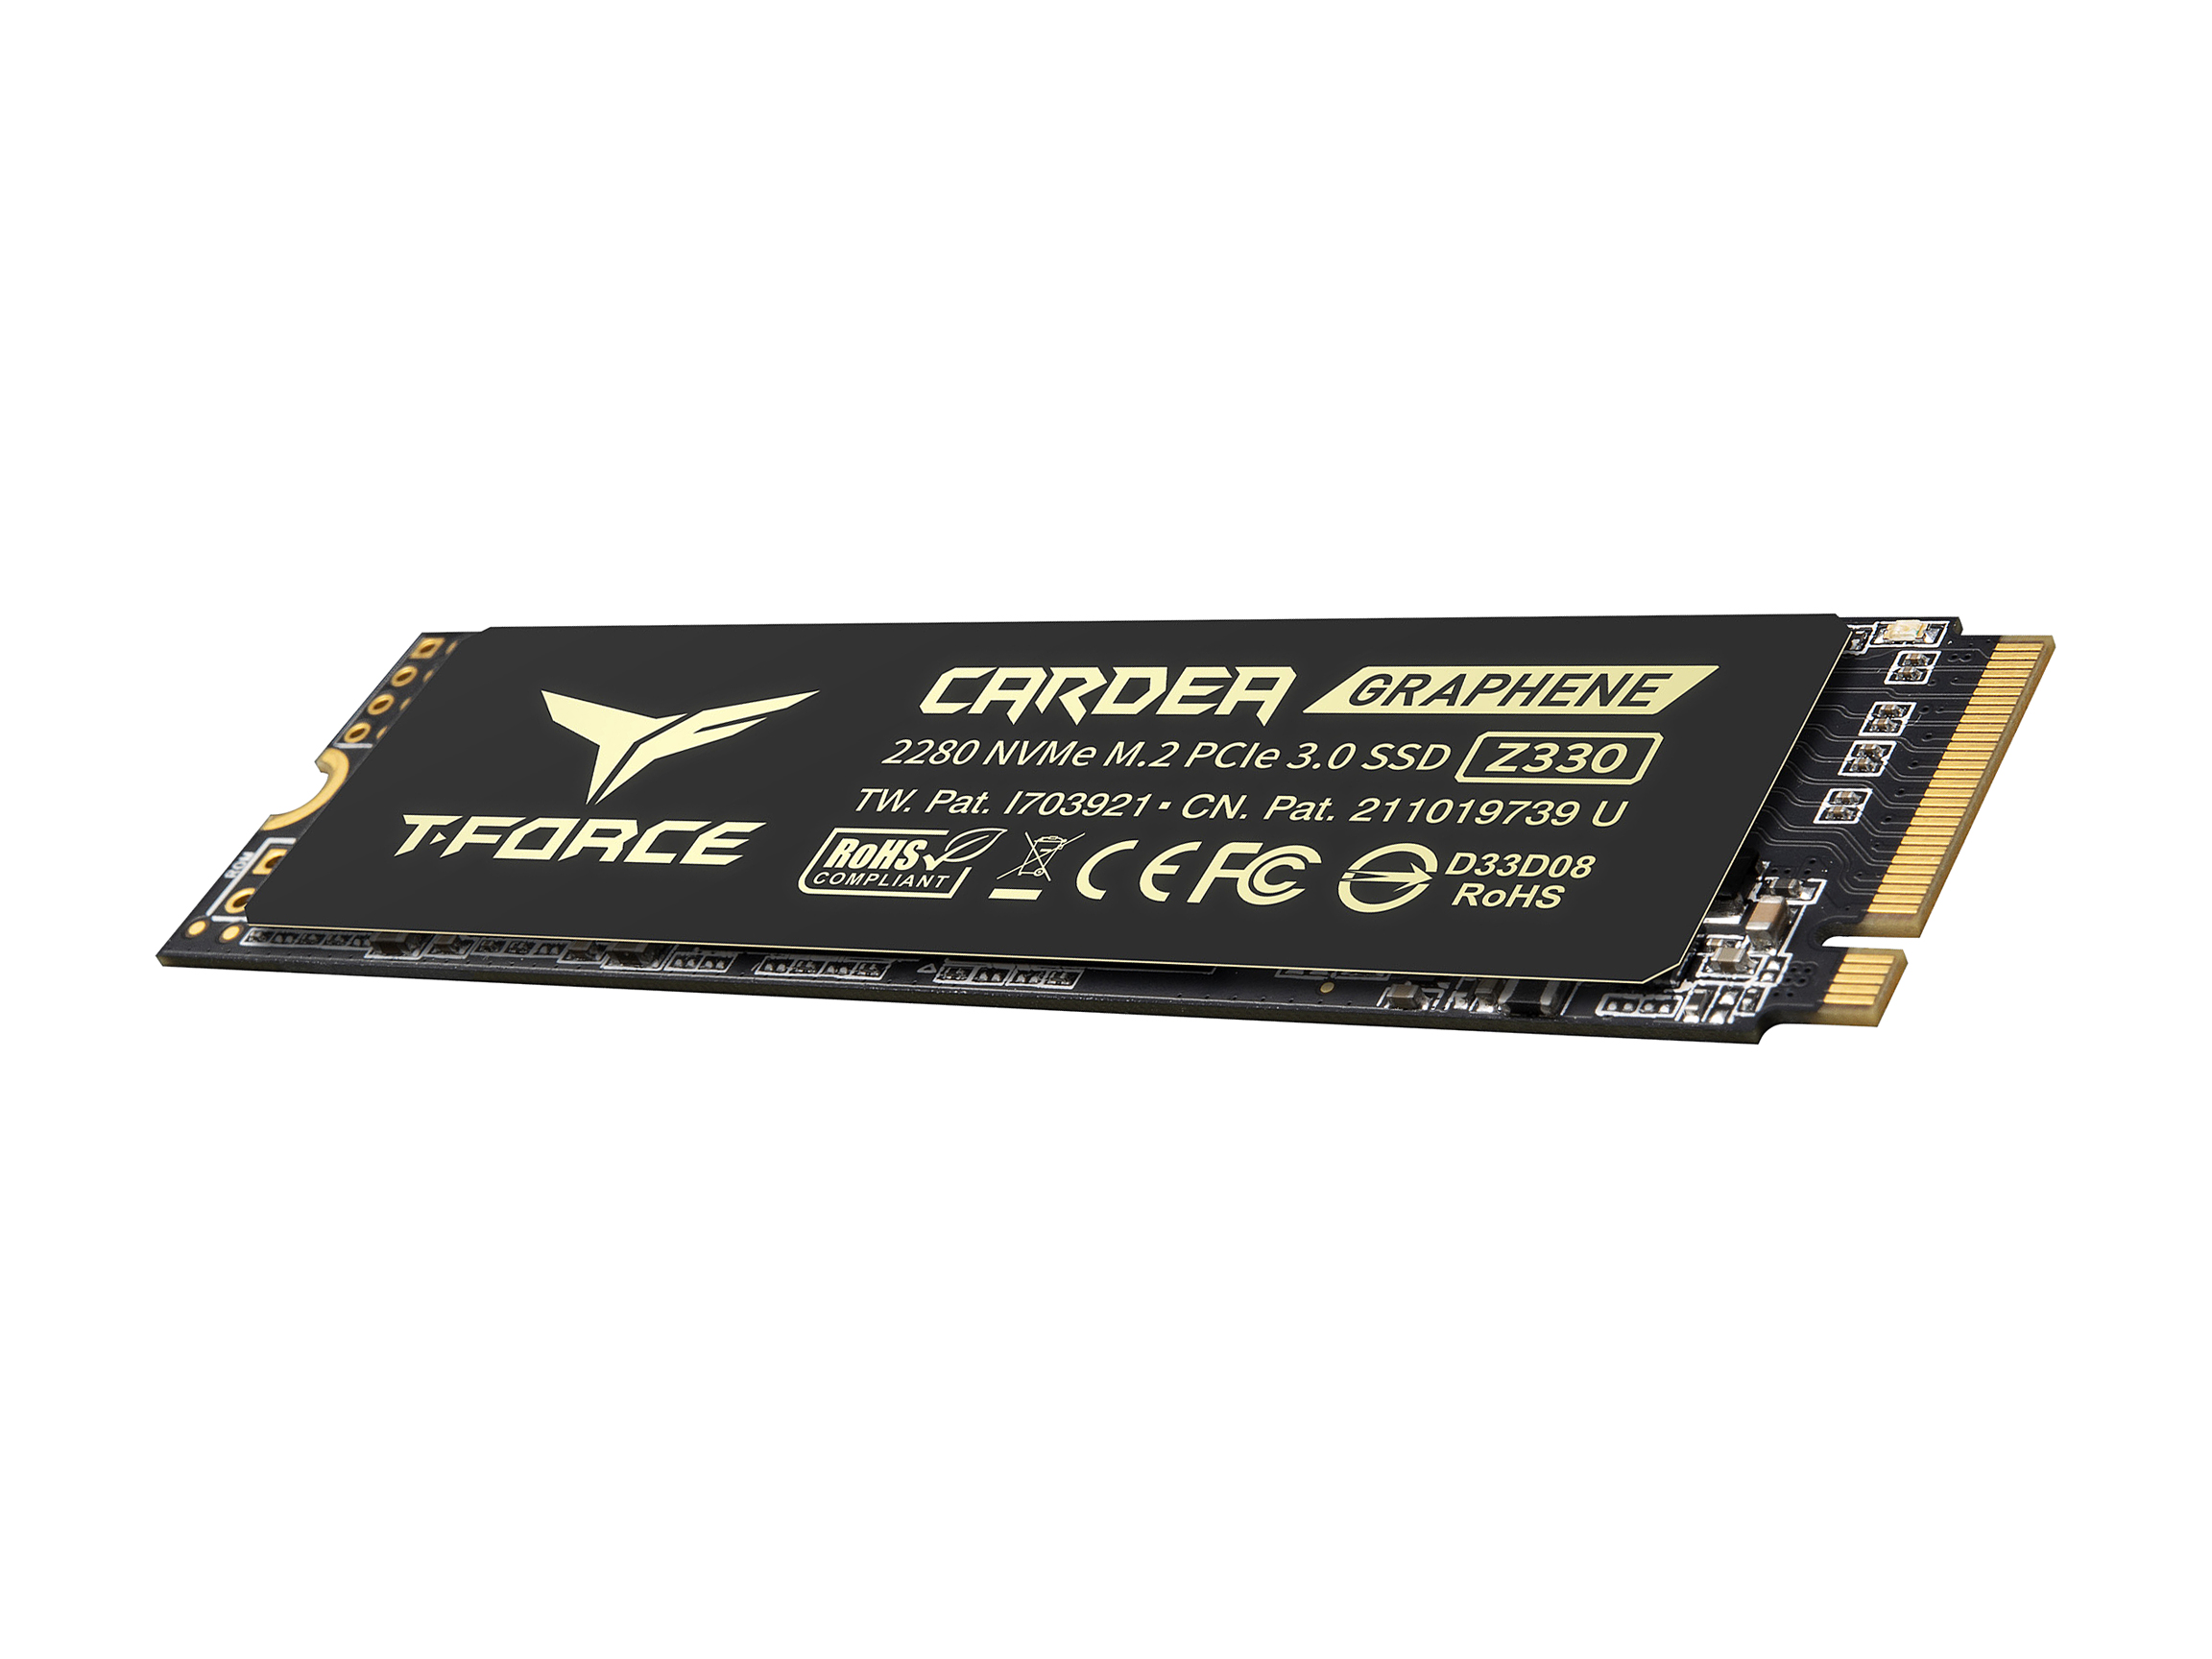 Team Group T-FORCE CARDEA ZERO Z330 M.2 2280 1TB PCIe Gen3 x4 with NVMe 1.3 Internal Solid State Drive (SSD) TM8FP8001T0C311